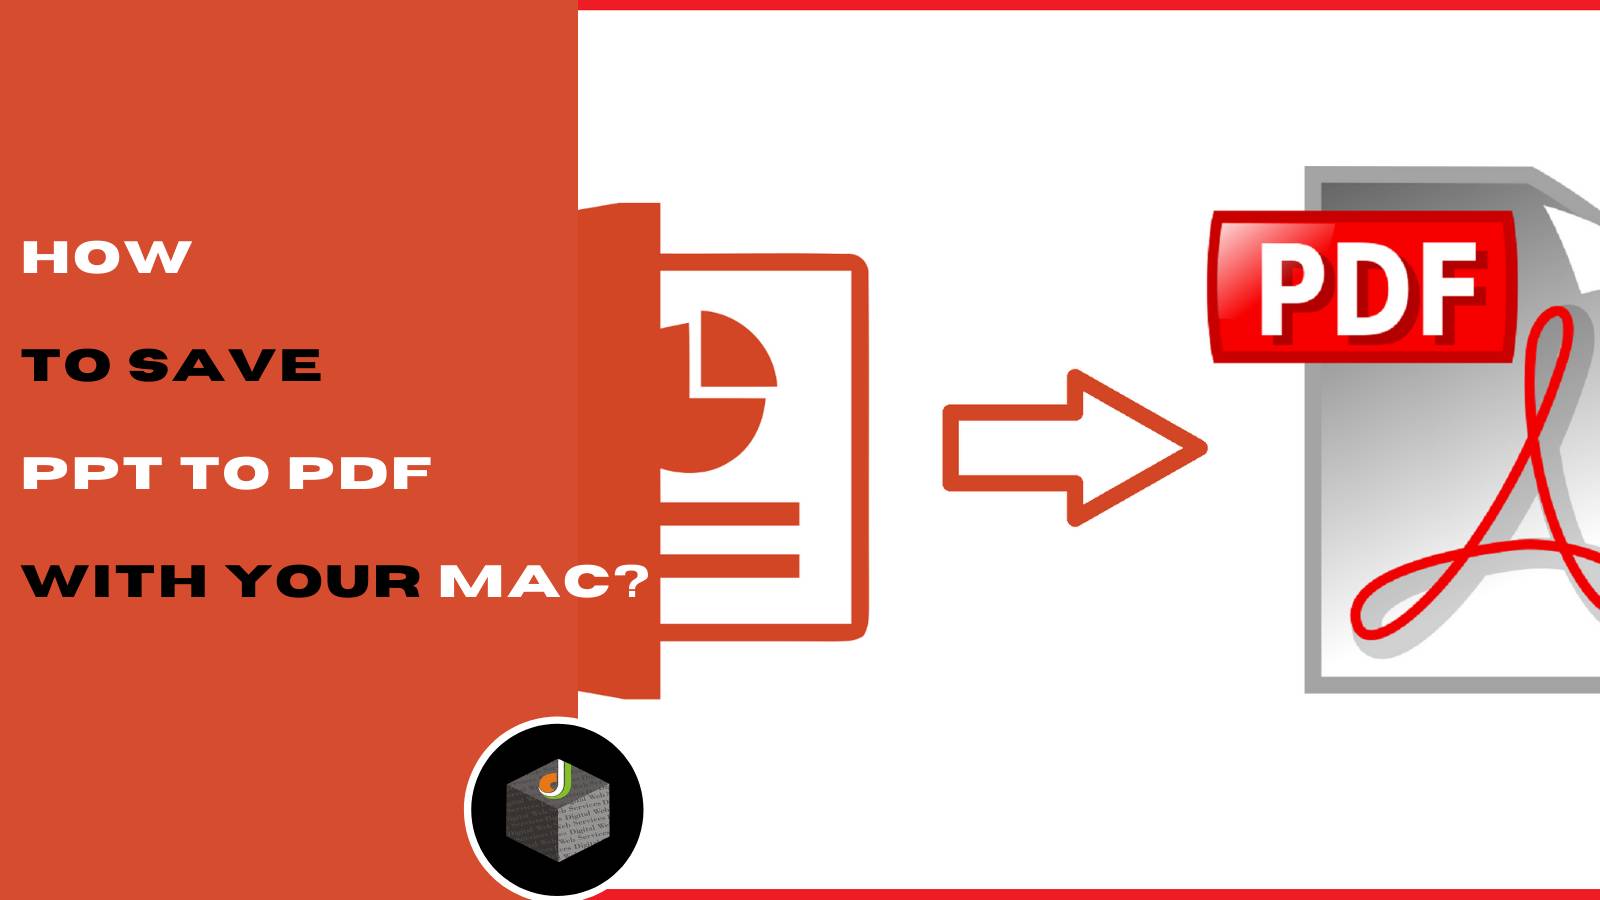 How To Save PPT To PDF With Your Mac